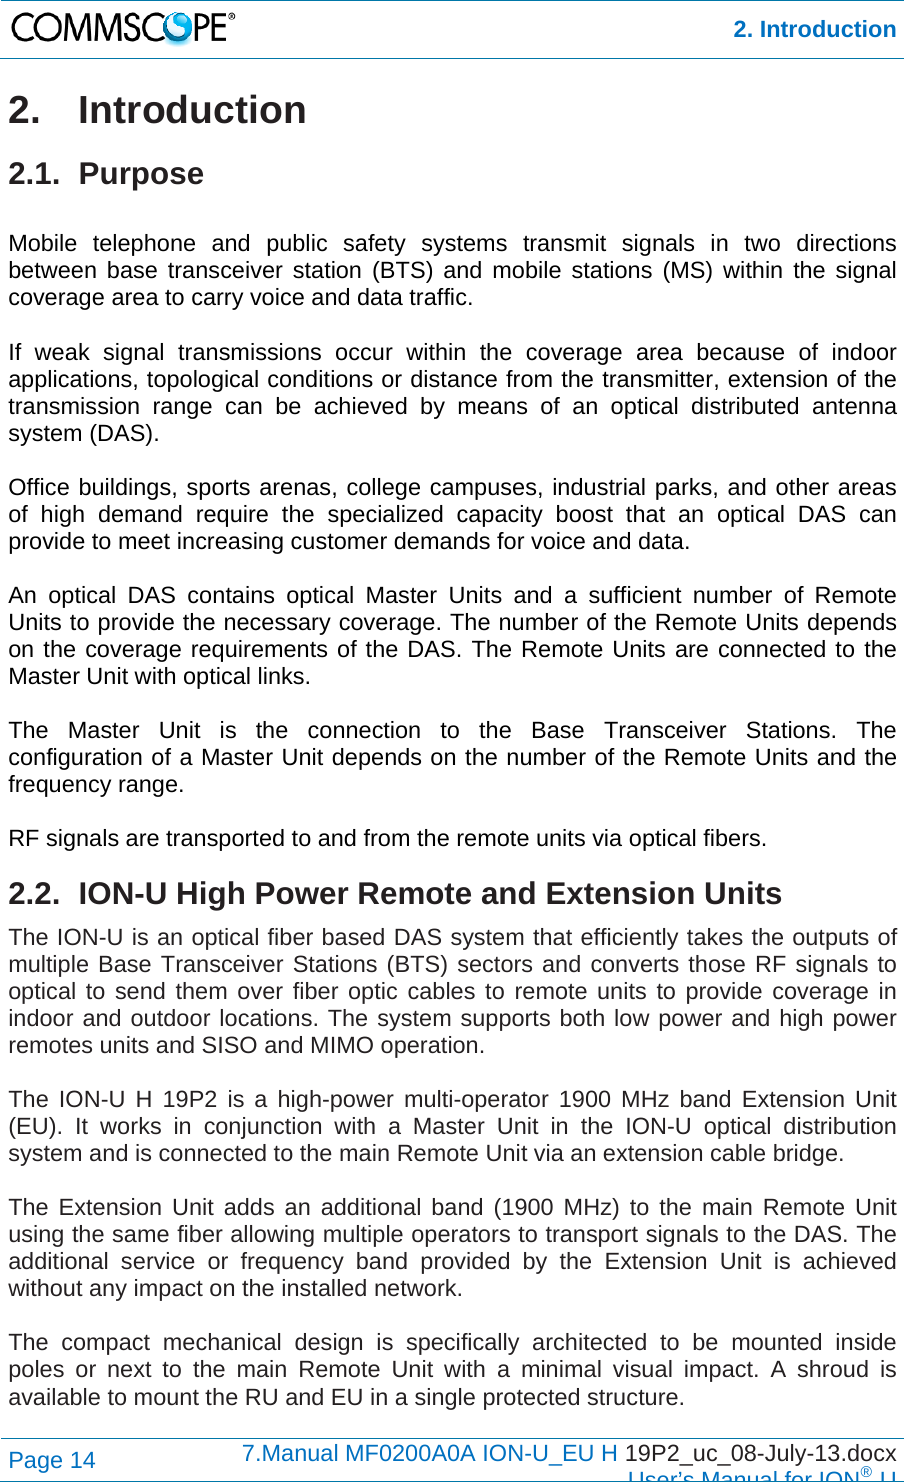  2. Introduction Page 14  7.Manual MF0200A0A ION-U_EU H 19P2_uc_08-July-13.docx  User’s Manual for ION®U 2. Introduction 2.1. Purpose  Mobile telephone and public safety systems transmit signals in two directions between base transceiver station (BTS) and mobile stations (MS) within the signal coverage area to carry voice and data traffic.  If weak signal transmissions occur within the coverage area because of indoor applications, topological conditions or distance from the transmitter, extension of the transmission range can be achieved by means of an optical distributed antenna system (DAS).  Office buildings, sports arenas, college campuses, industrial parks, and other areas of high demand require the specialized capacity boost that an optical DAS can provide to meet increasing customer demands for voice and data.  An optical DAS contains optical Master Units and a sufficient number of Remote Units to provide the necessary coverage. The number of the Remote Units depends on the coverage requirements of the DAS. The Remote Units are connected to the Master Unit with optical links.  The Master Unit is the connection to the Base Transceiver Stations. The configuration of a Master Unit depends on the number of the Remote Units and the frequency range.   RF signals are transported to and from the remote units via optical fibers. 2.2.  ION-U High Power Remote and Extension Units The ION-U is an optical fiber based DAS system that efficiently takes the outputs of multiple Base Transceiver Stations (BTS) sectors and converts those RF signals to optical to send them over fiber optic cables to remote units to provide coverage in indoor and outdoor locations. The system supports both low power and high power remotes units and SISO and MIMO operation.   The ION-U H 19P2 is a high-power multi-operator 1900 MHz band Extension Unit (EU). It works in conjunction with a Master Unit in the ION-U optical distribution system and is connected to the main Remote Unit via an extension cable bridge.  The Extension Unit adds an additional band (1900 MHz) to the main Remote Unit using the same fiber allowing multiple operators to transport signals to the DAS. The additional service or frequency band provided by the Extension Unit is achieved without any impact on the installed network.  The compact mechanical design is specifically architected to be mounted inside poles or next to the main Remote Unit with a minimal visual impact. A shroud is available to mount the RU and EU in a single protected structure.  